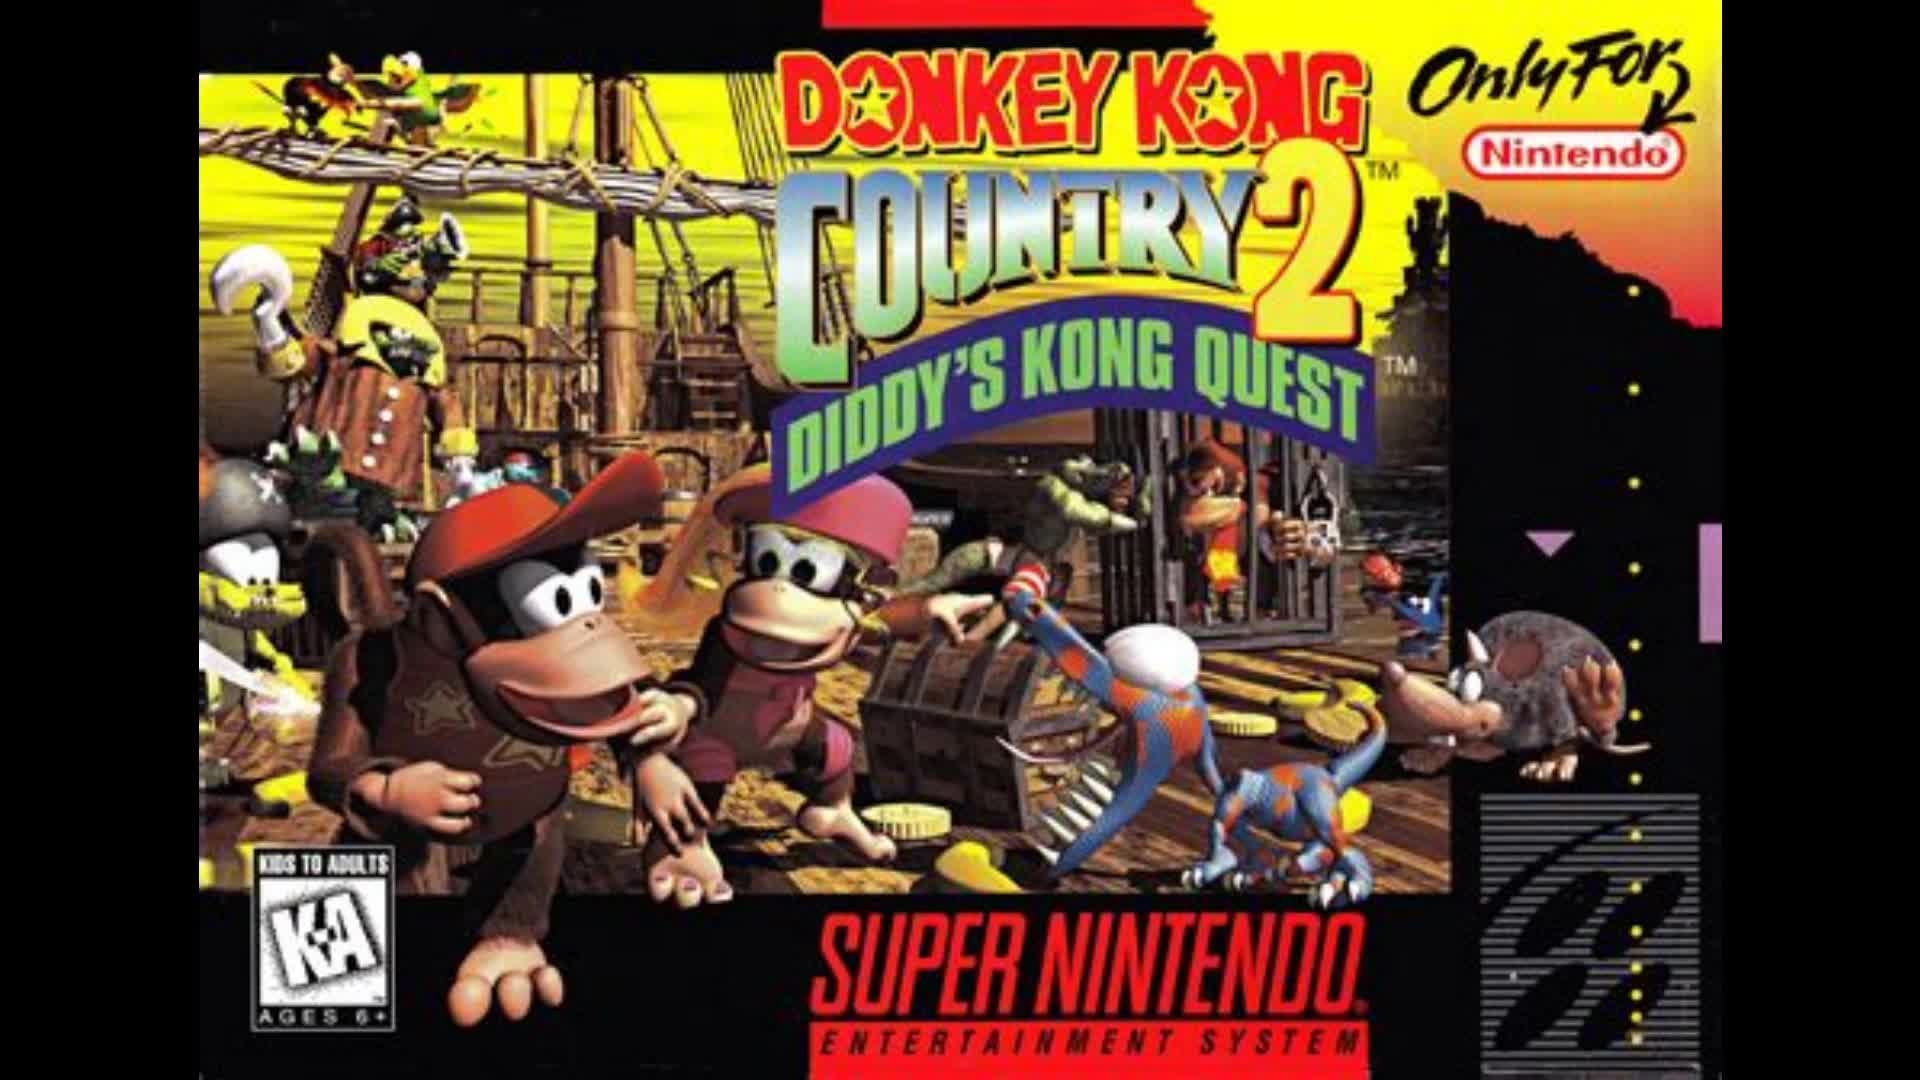 Donkey Kong Country 2 - Forest Interlude (Enchanted Forest) Theme